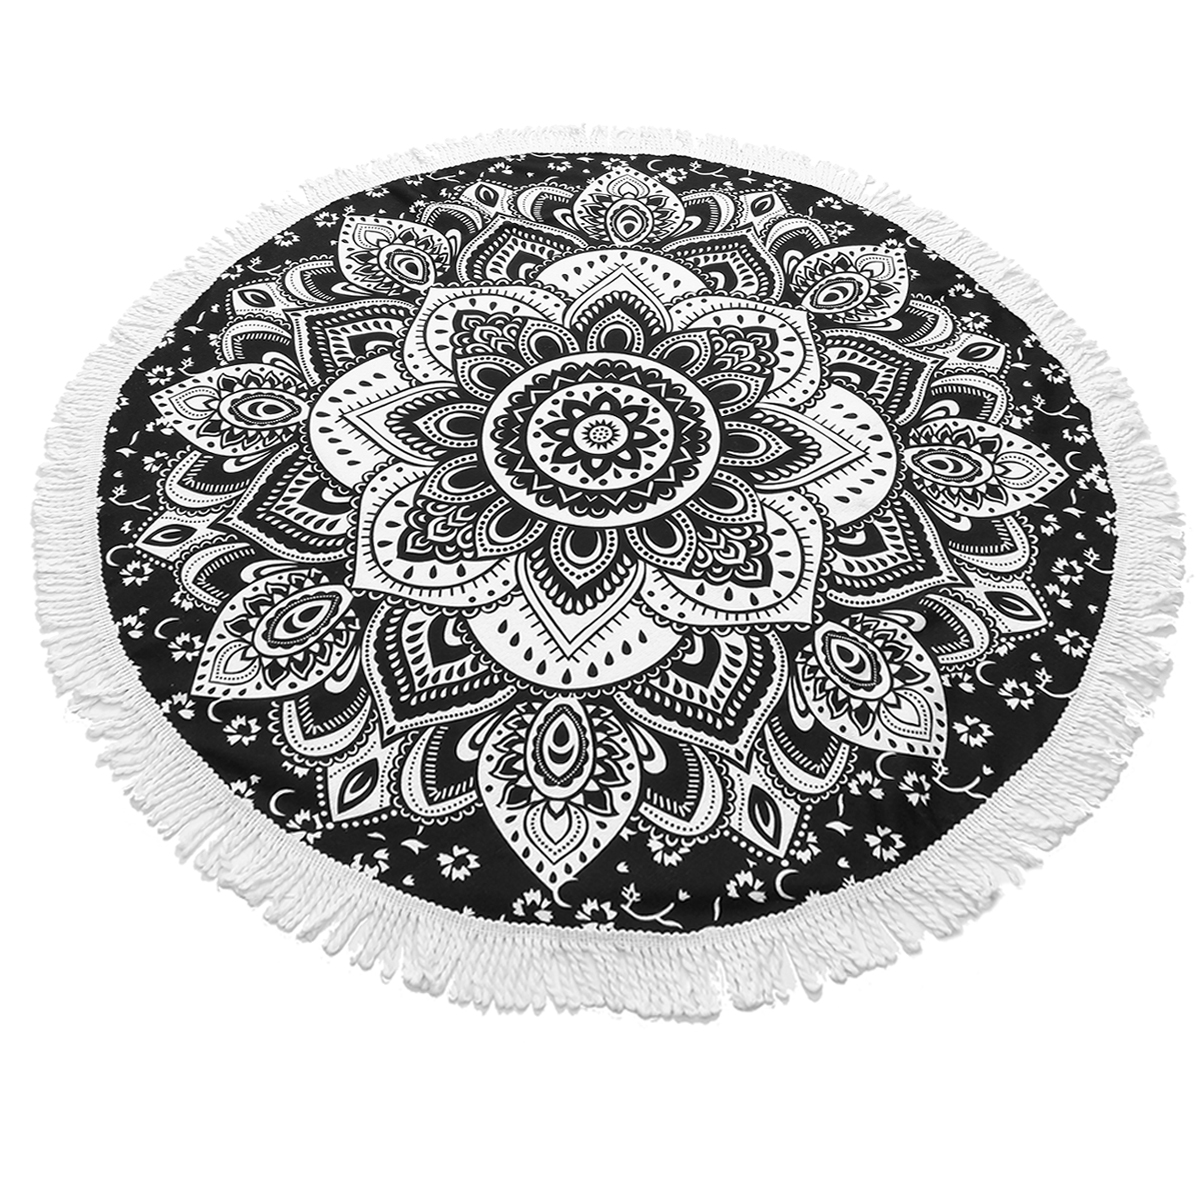 1M15M-Round-Beach-Towel-Tassel-Tapestry-Yoga-Mats-Blankets-Home-Fitness-Decoration-Accessories-1678169-11